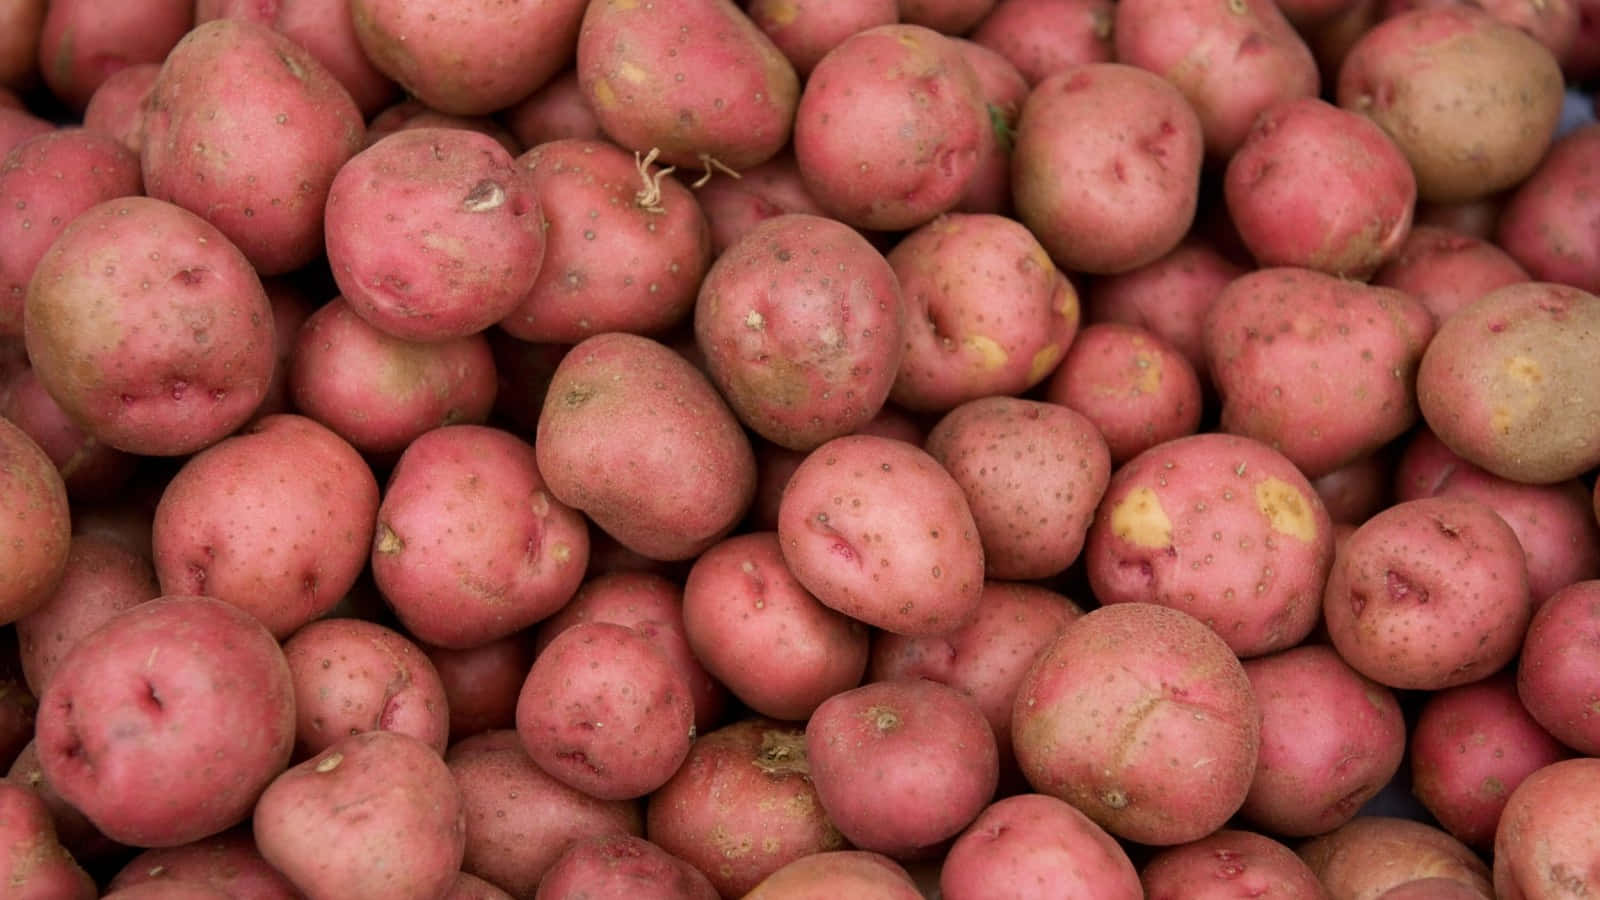 Red Potatoes on a Wooden Surface Wallpaper